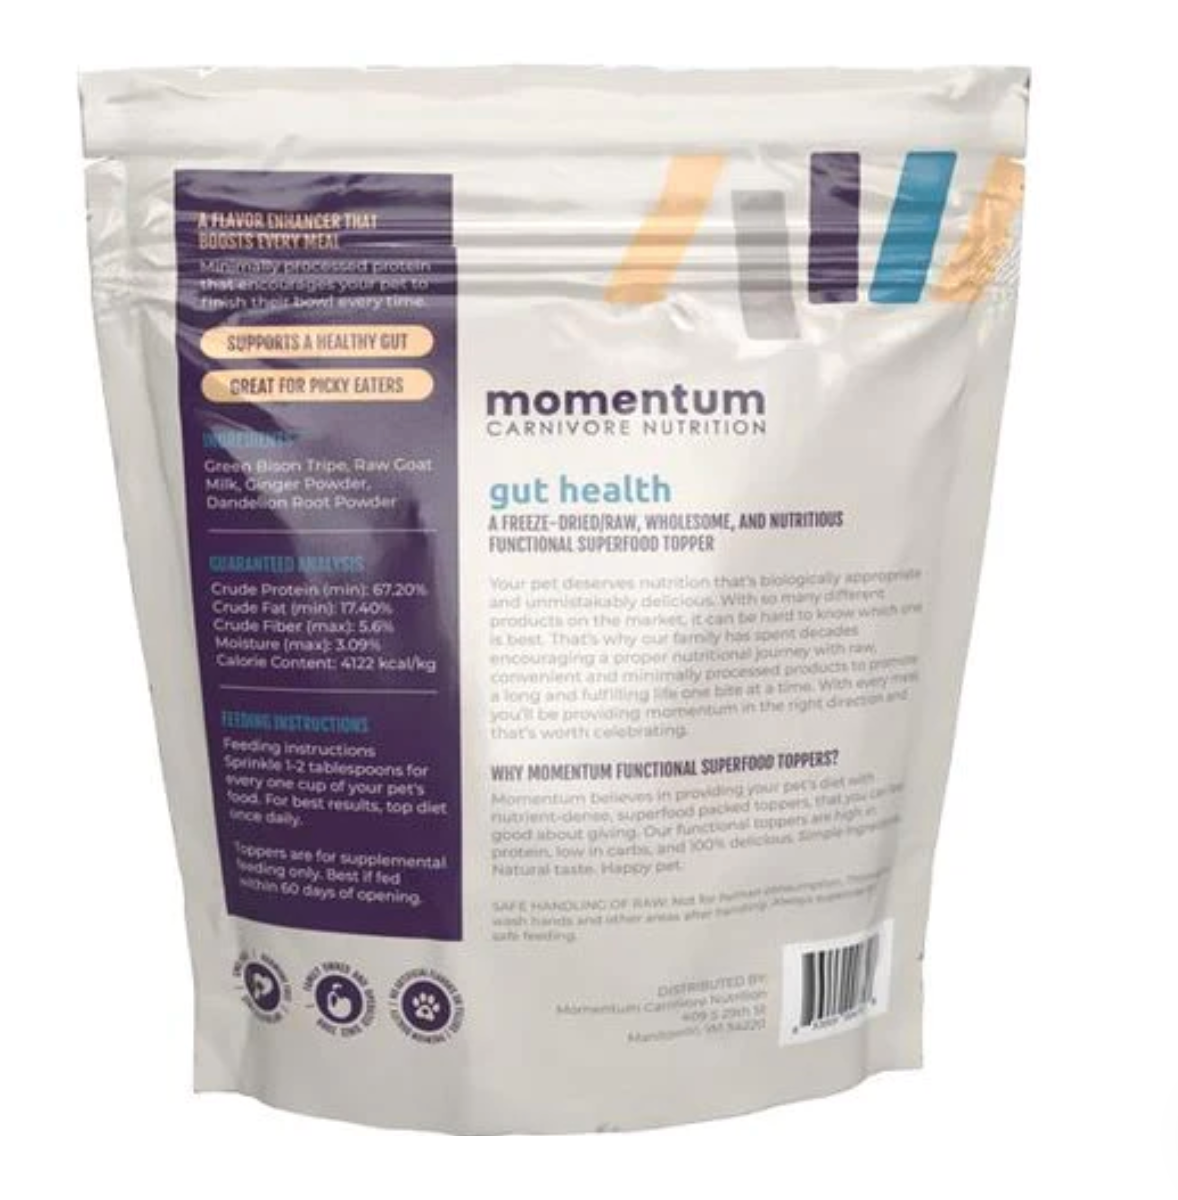 Momentum Carnivore Nutrition Freeze-Dried Raw Gut Health Topper